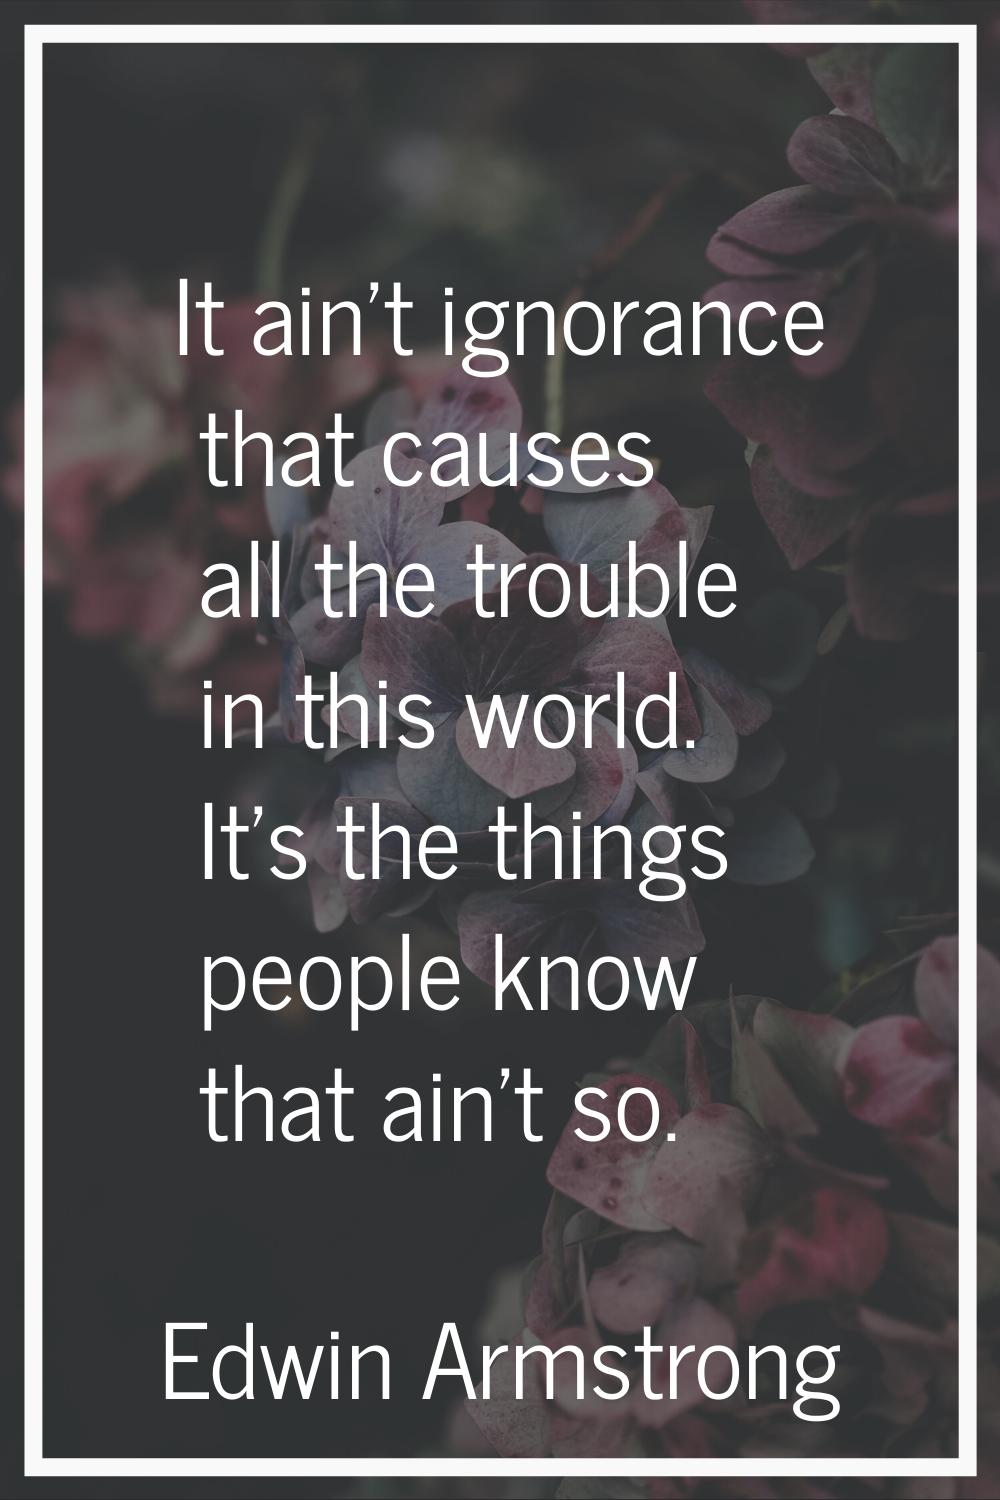 It ain't ignorance that causes all the trouble in this world. It's the things people know that ain'